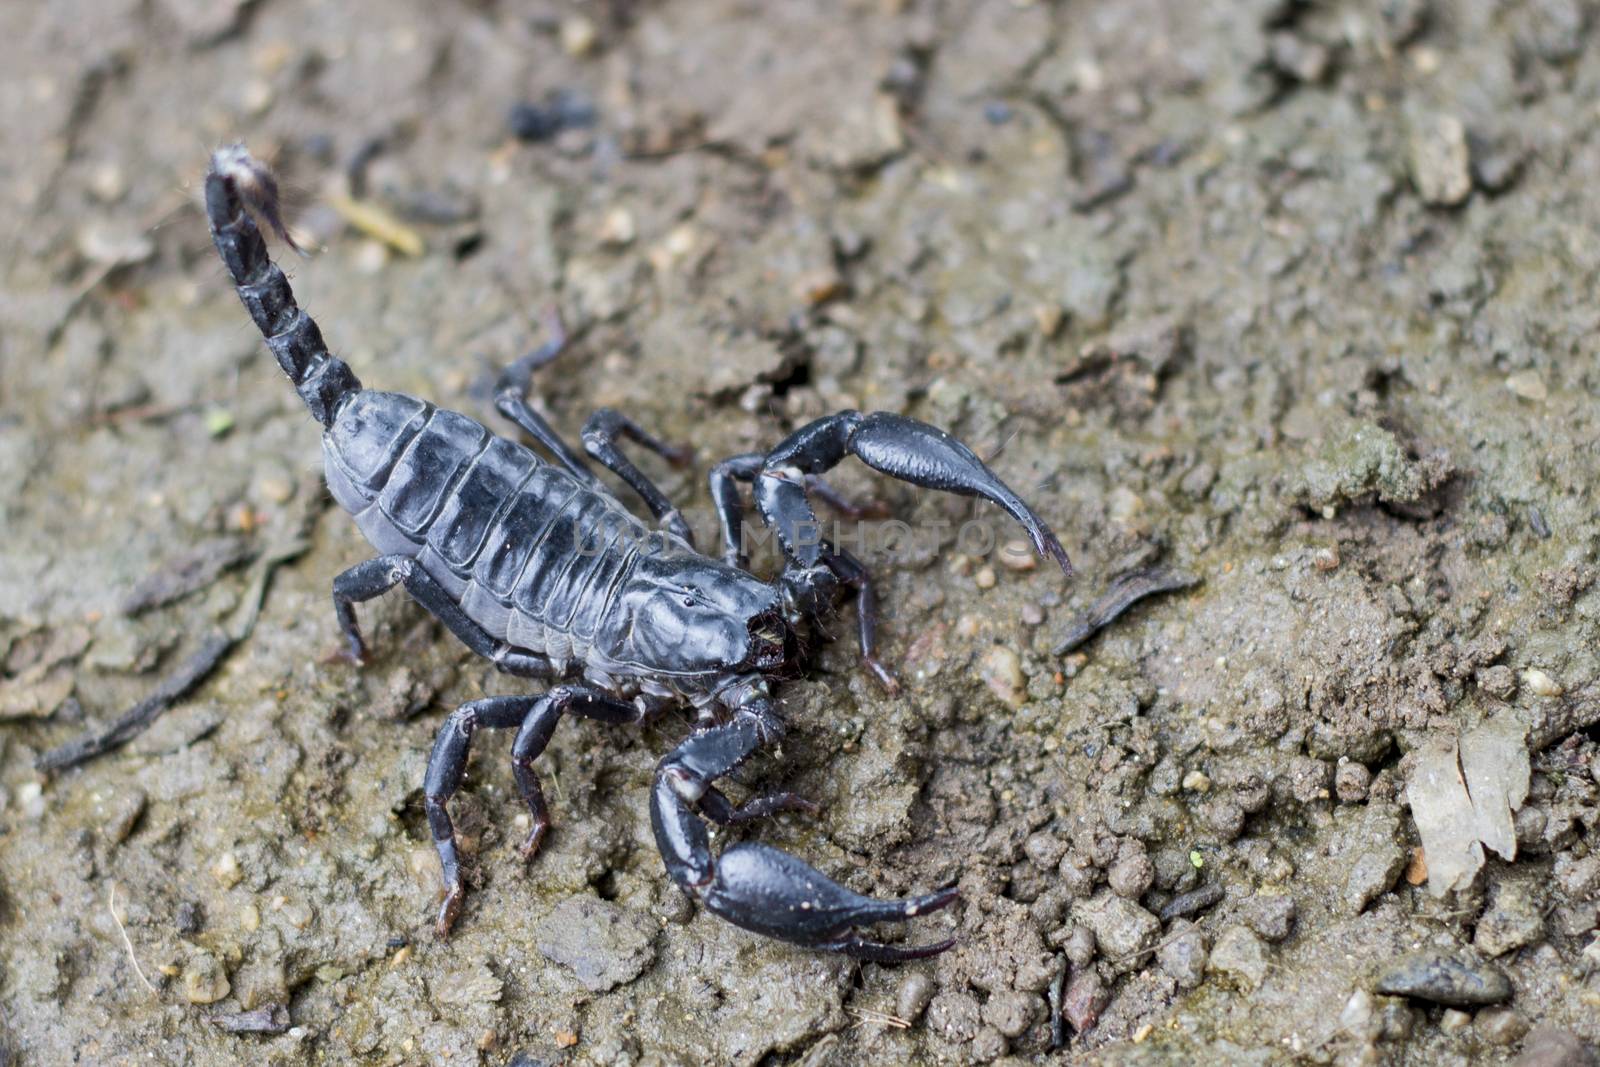 Image of scorpion on the ground. by yod67